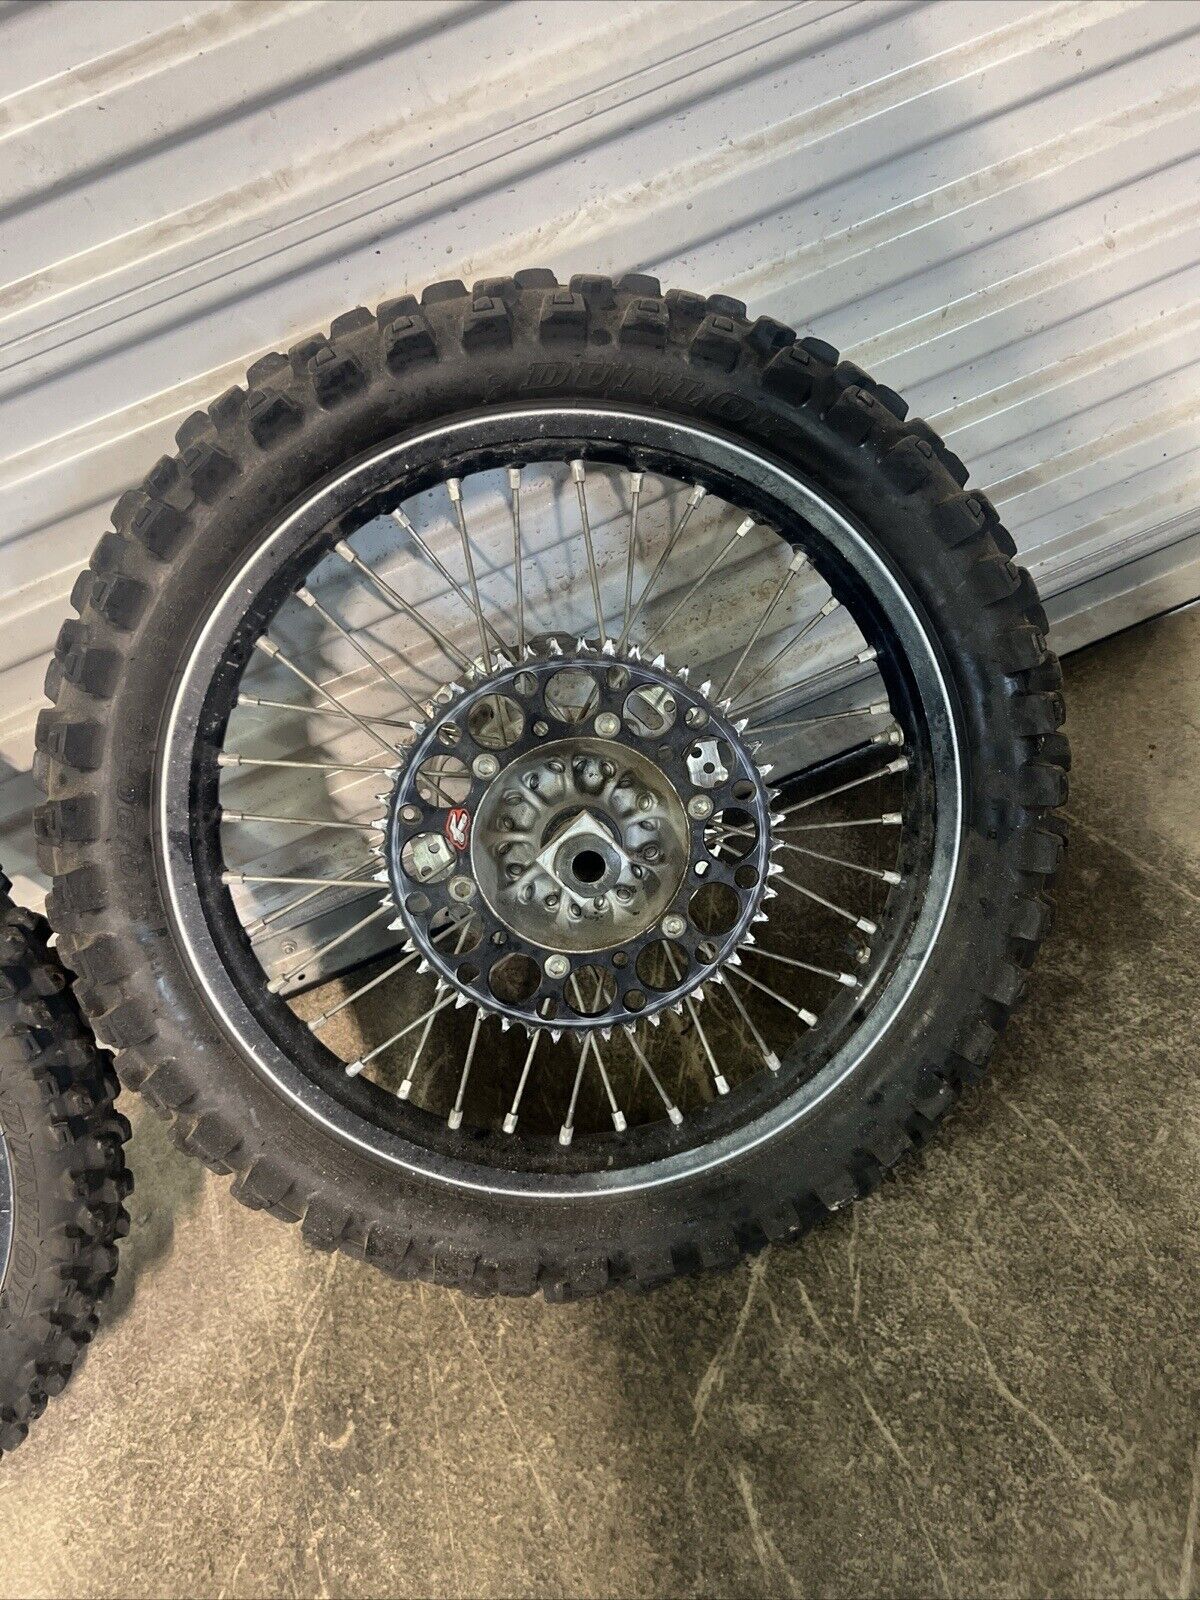 2011 Kx250f Wheels And Tires